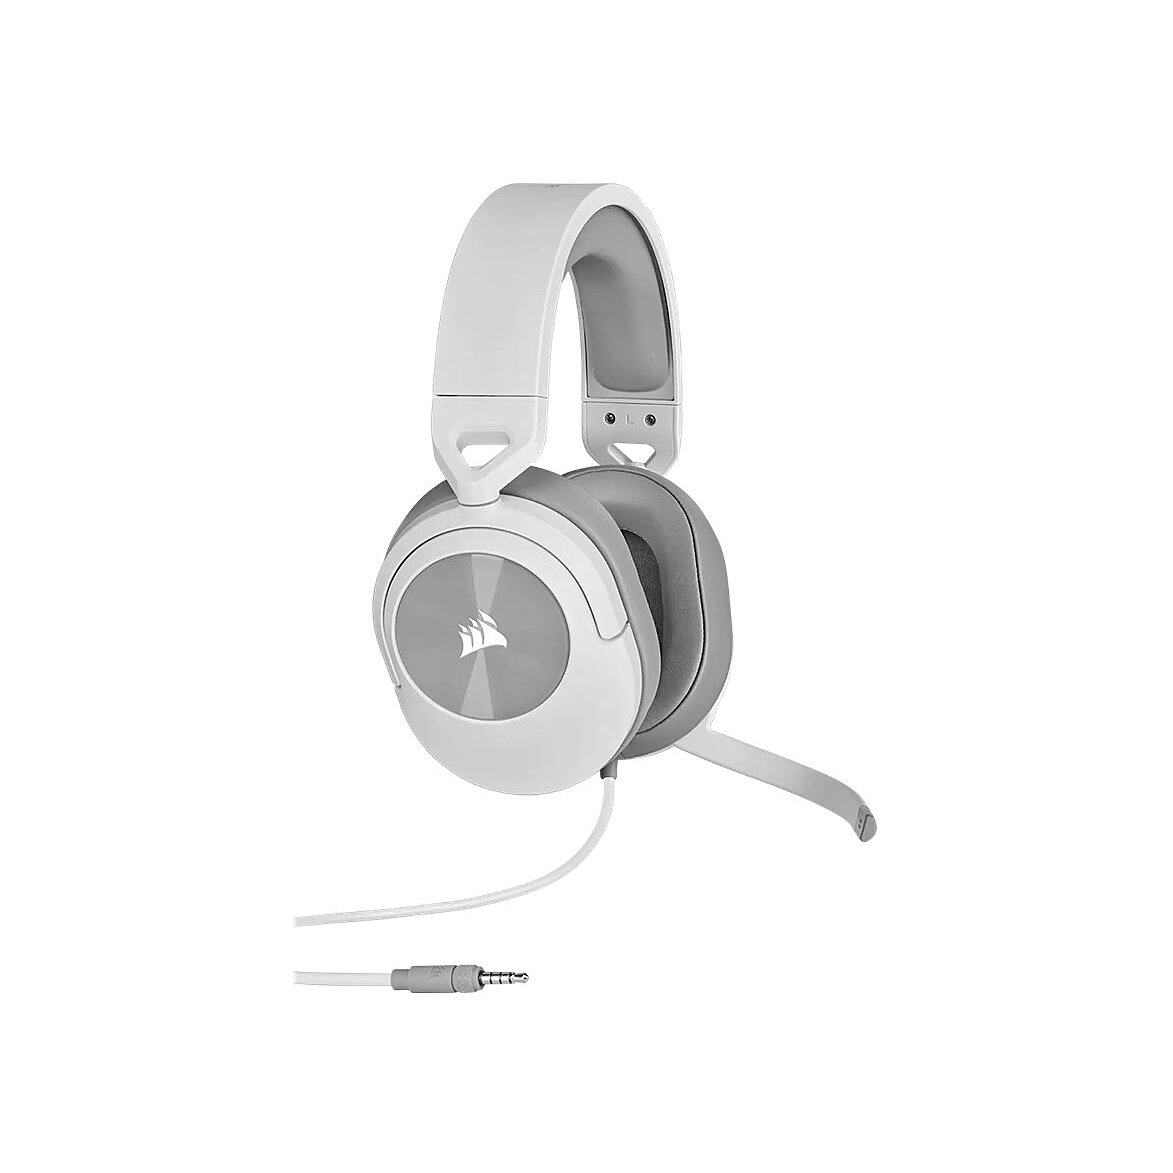 Grosbill Micro-casque Corsair HS55 Stereo - Blanc/Filaire